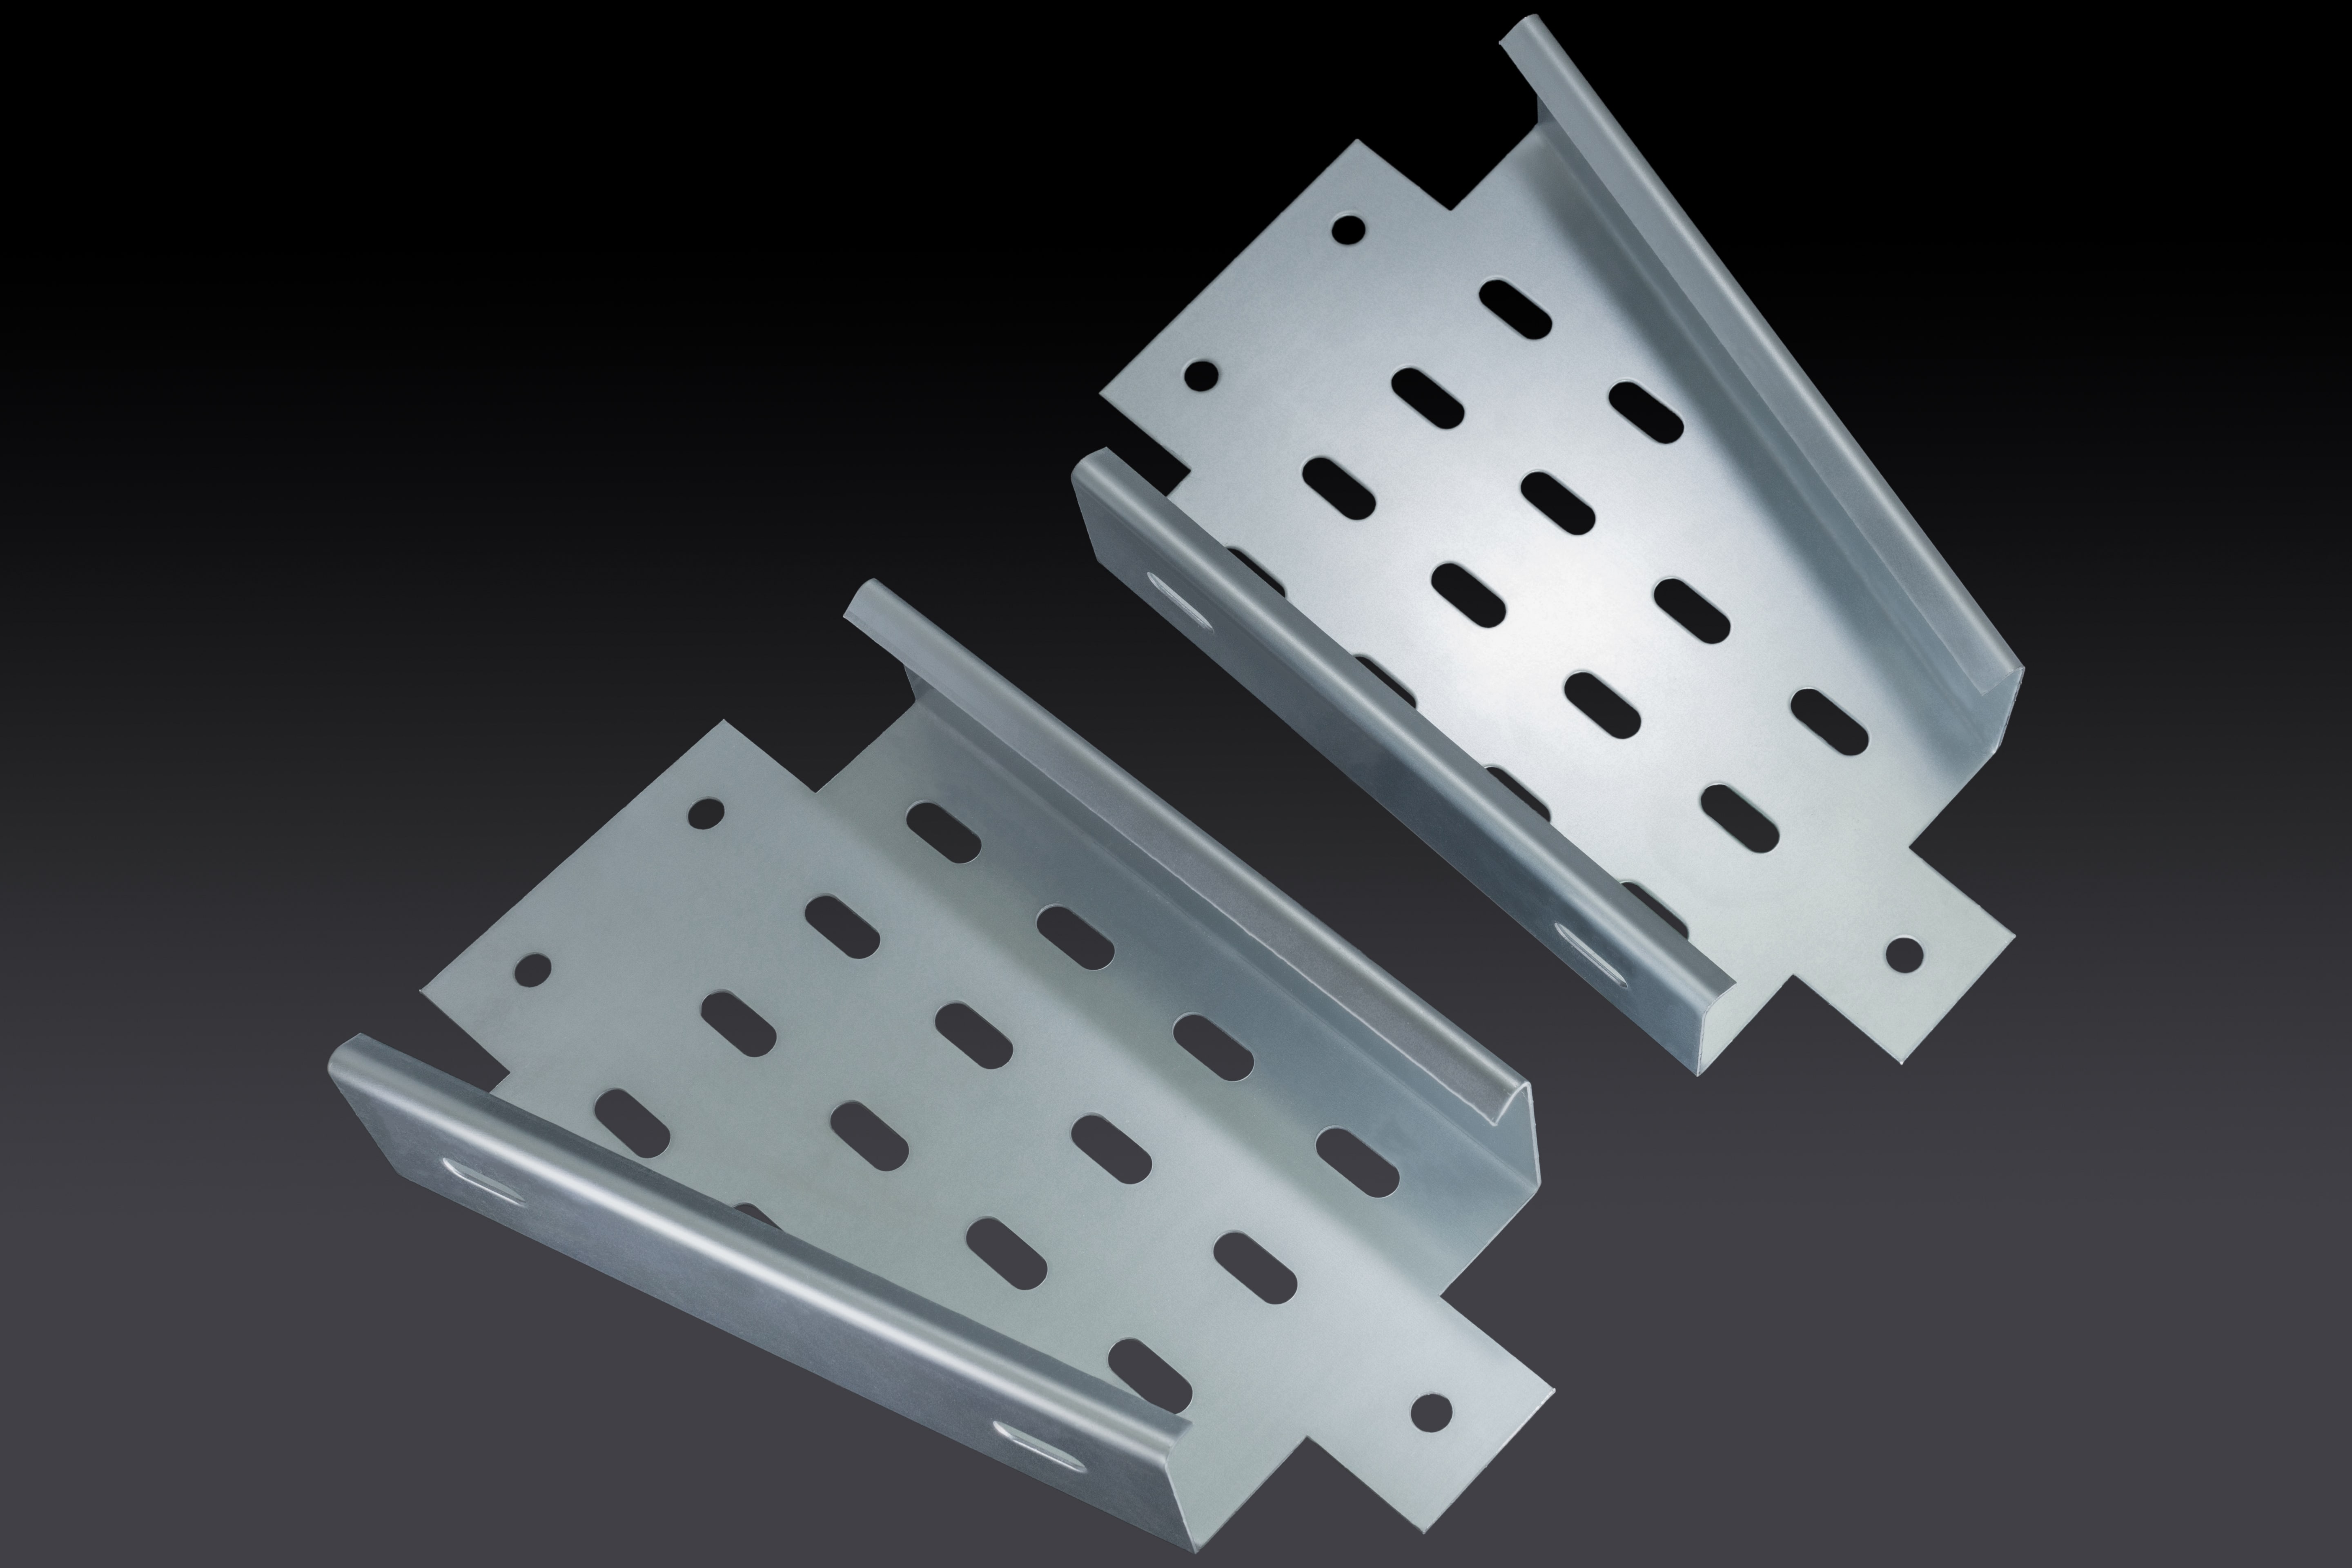 https://inventionsteel.com/wp-content/uploads/2022/07/Cable-Tray-Left-Right-Reducer-min.jpg